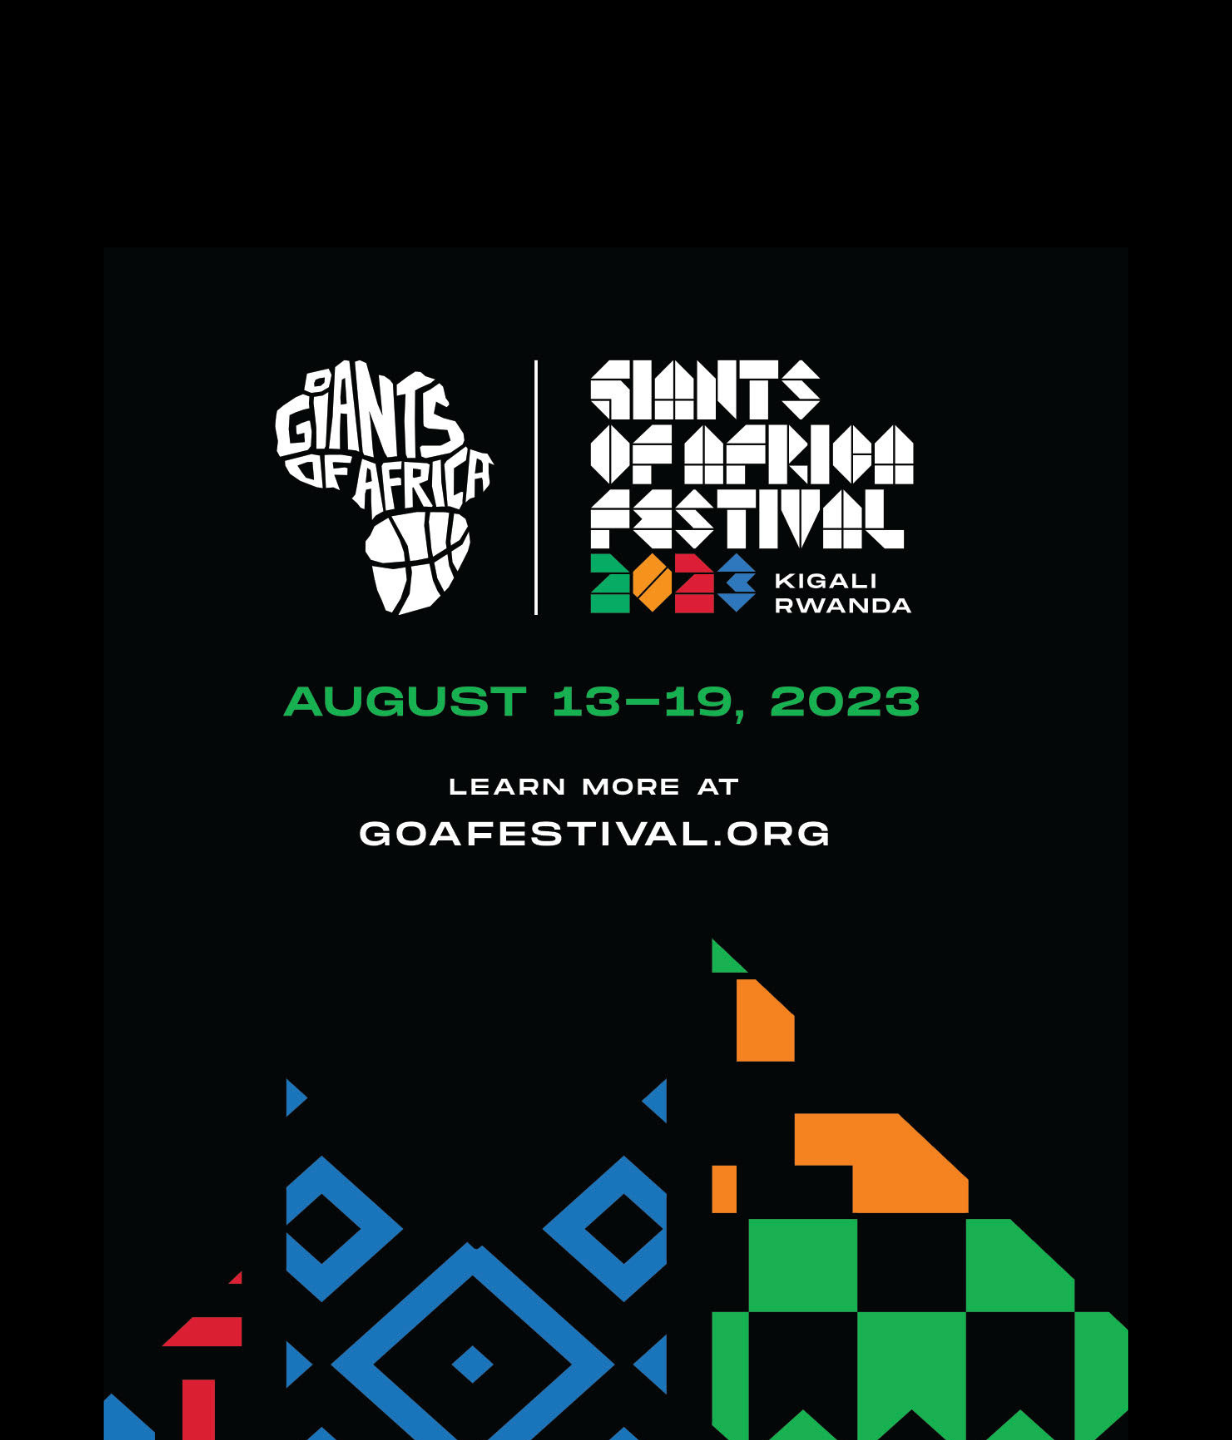 Giants Festival 2023 takes place on August 12-19 2023